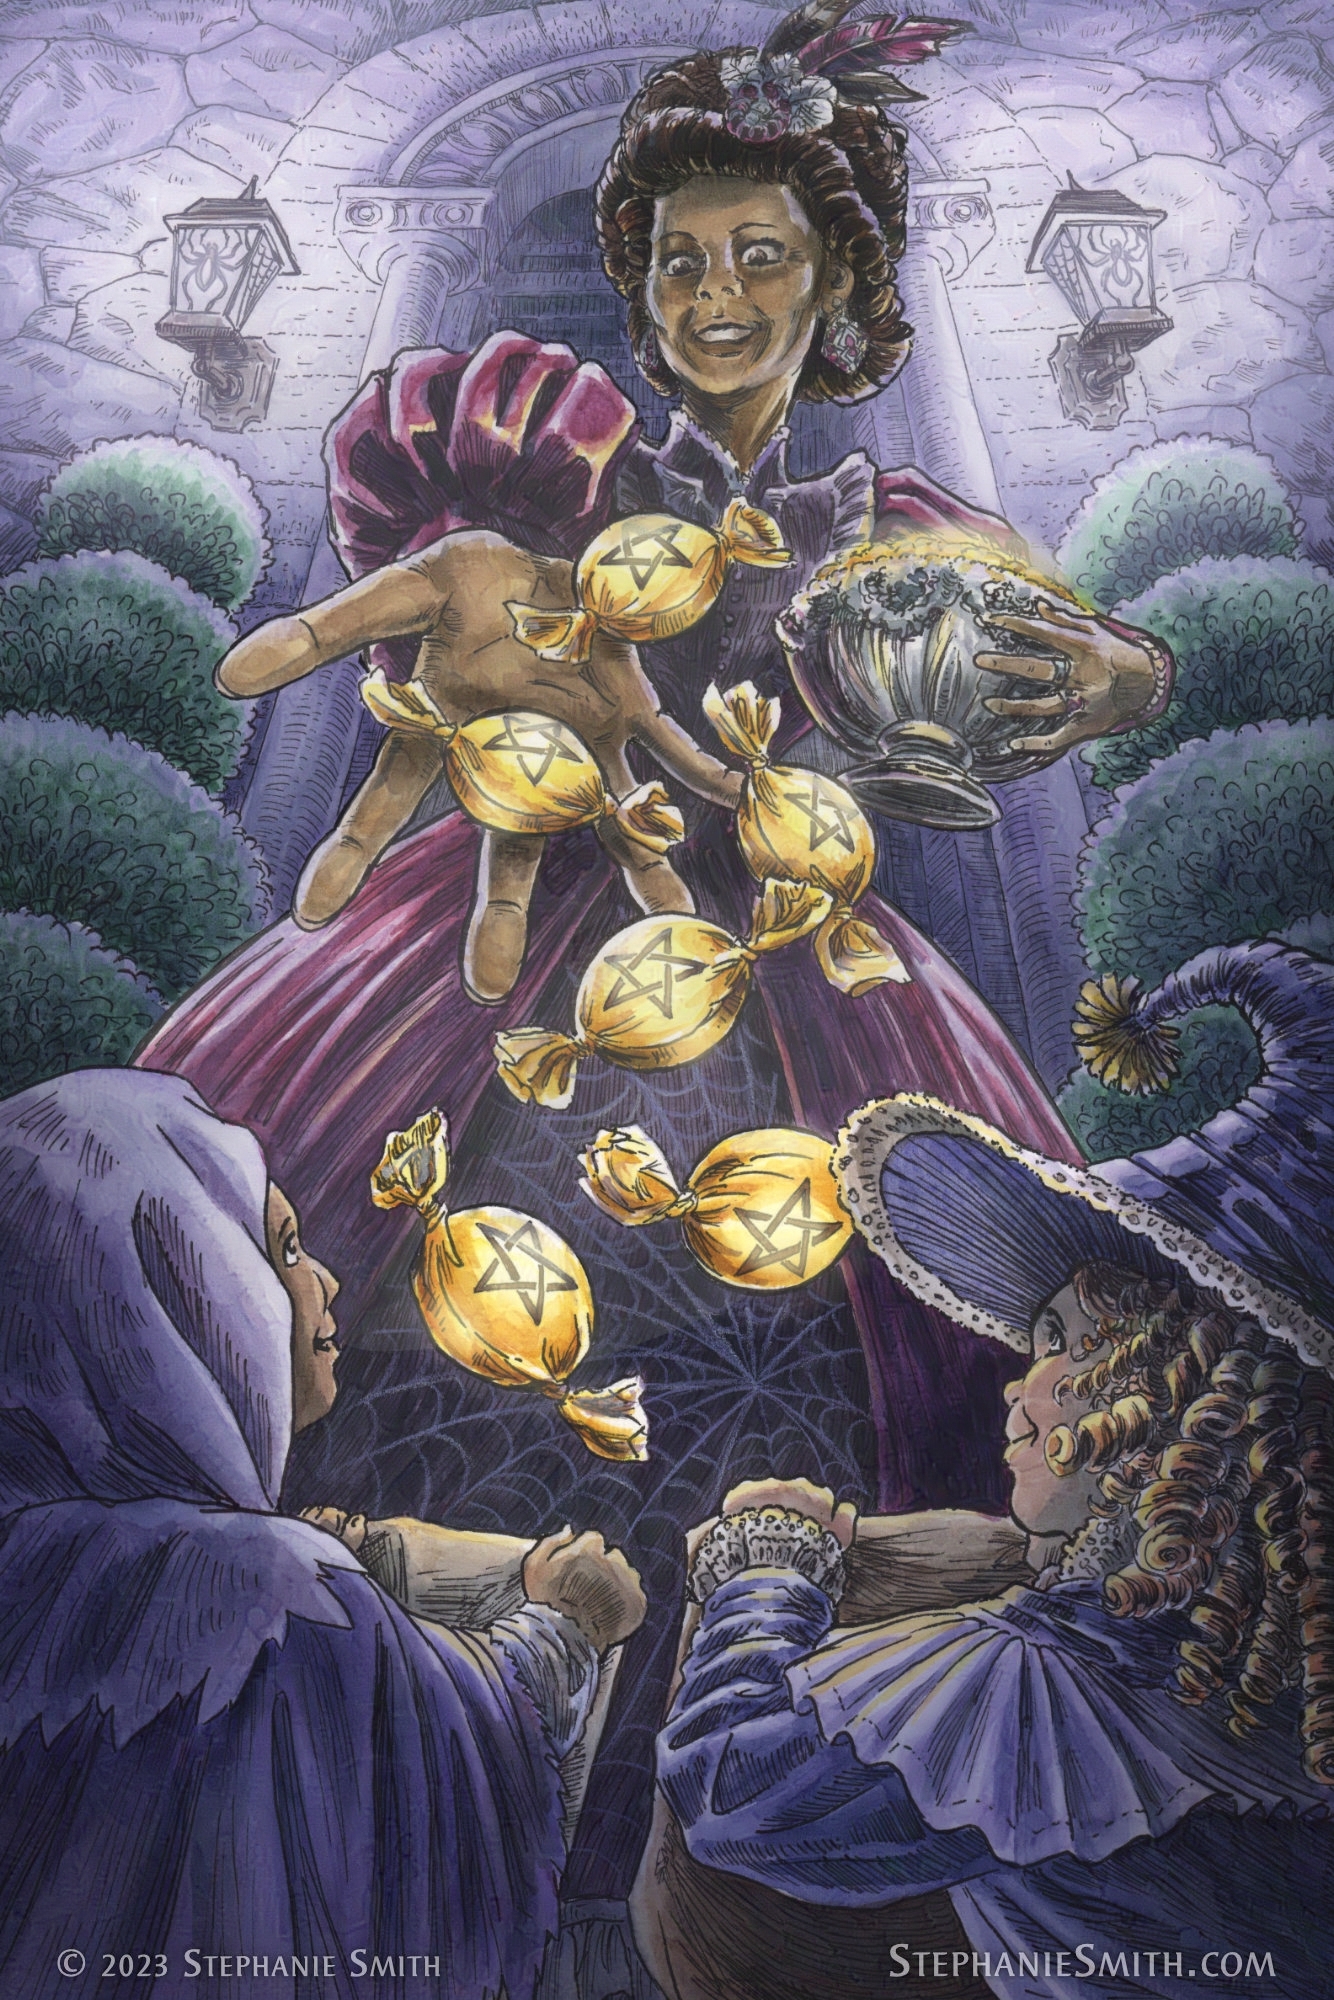 Artwork of a dark-skinned woman in a dark red, victorian-style gown, standing in front of a stone doorway lit only by a pair of lanterns at night. She is happily tossing six gold-wrapped candies with a single five-pointed star on each at two costumed children holding sacks below her: one in a plain hood and robe, and the other in a fancy witch costume with ruffles and curly hair.